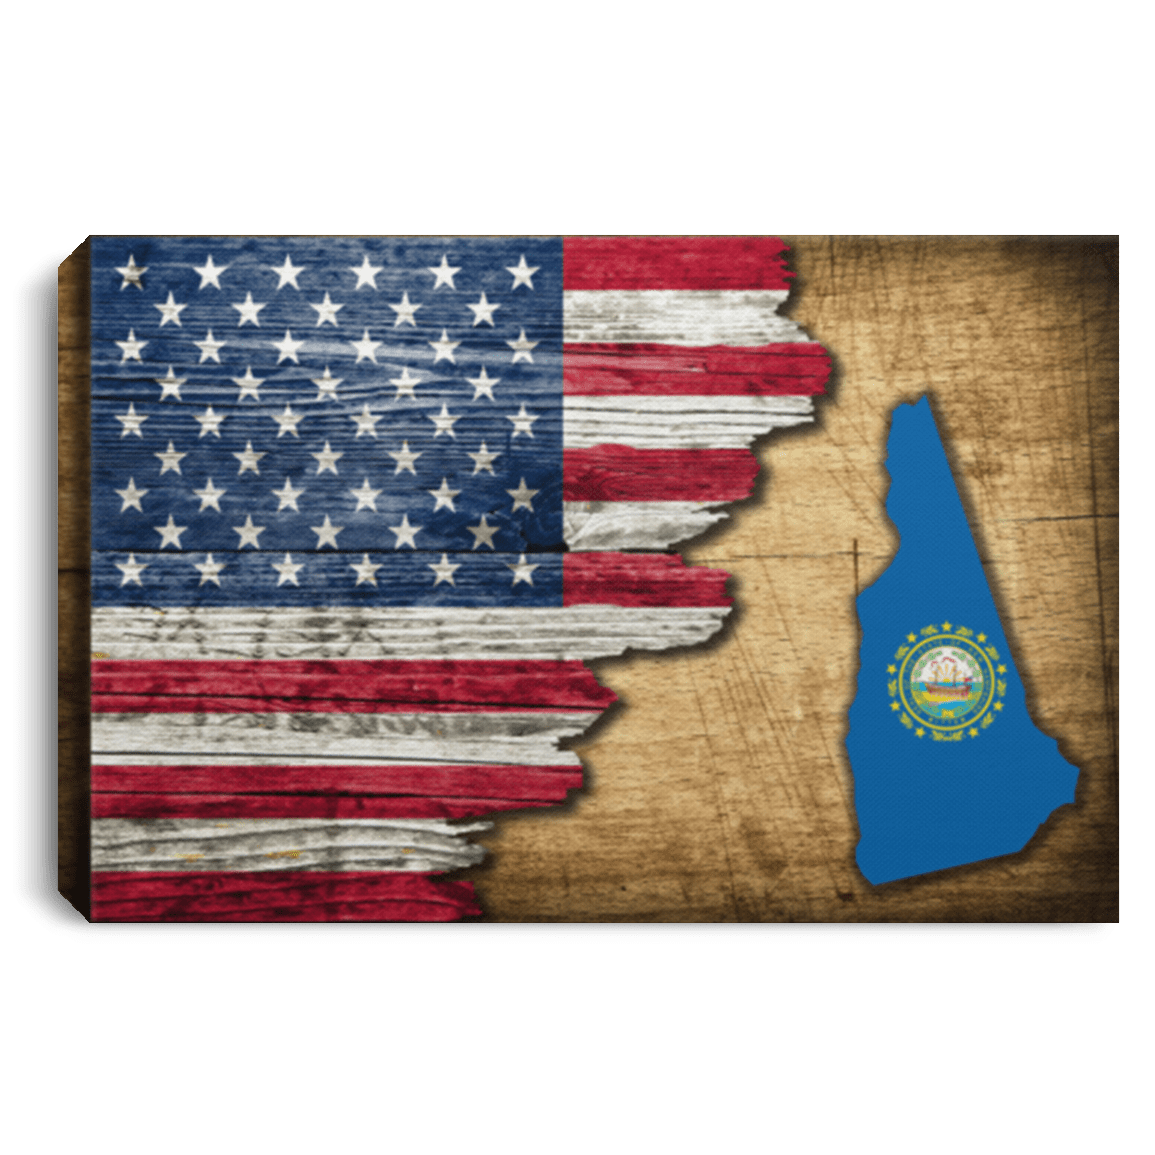 United States/New Hampshire Flag Ripped Effect 12X8 Inches Landscape Canvas .75In Frame